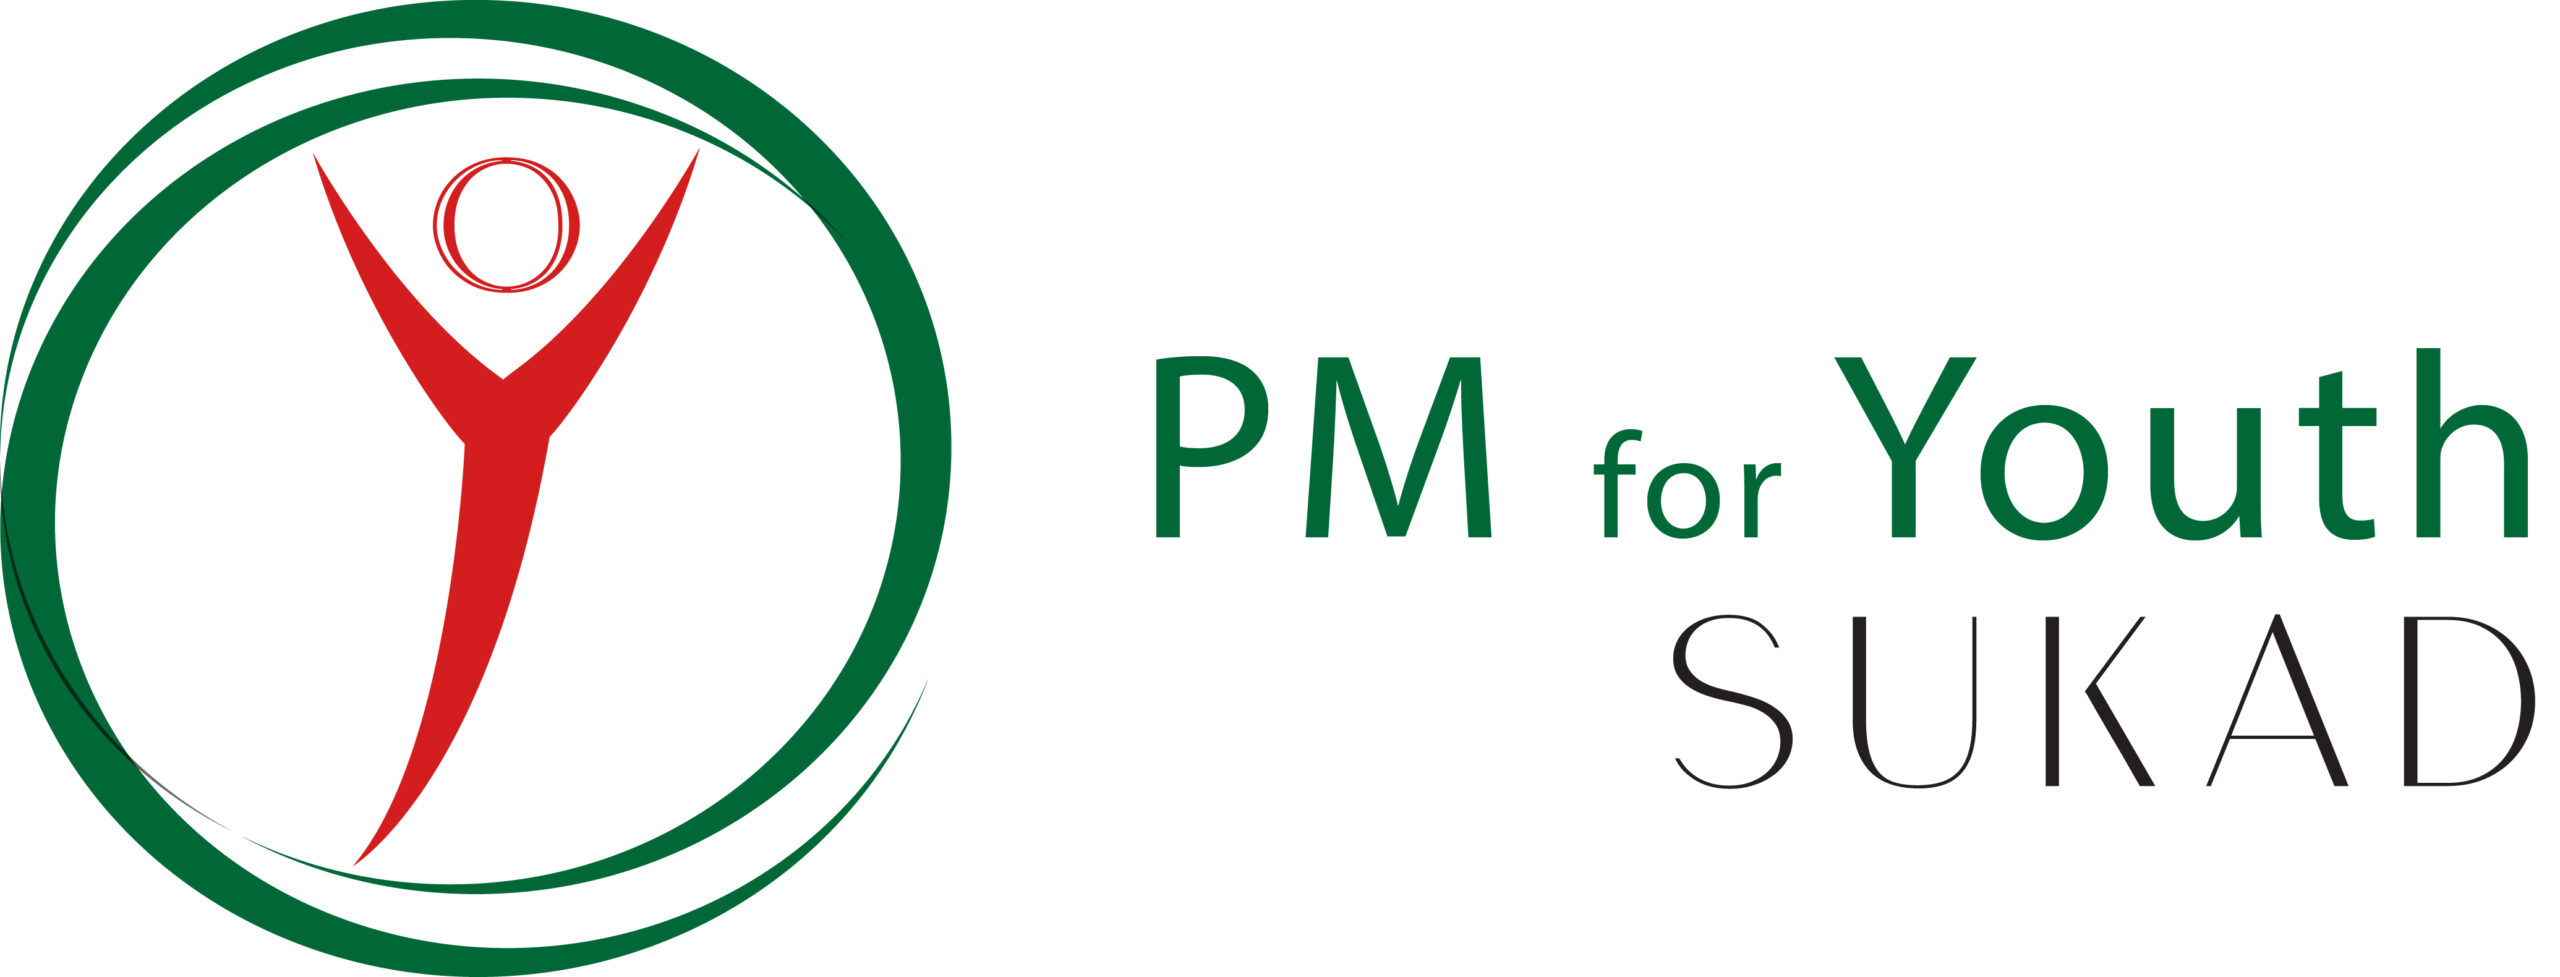 PM for Youth Logo